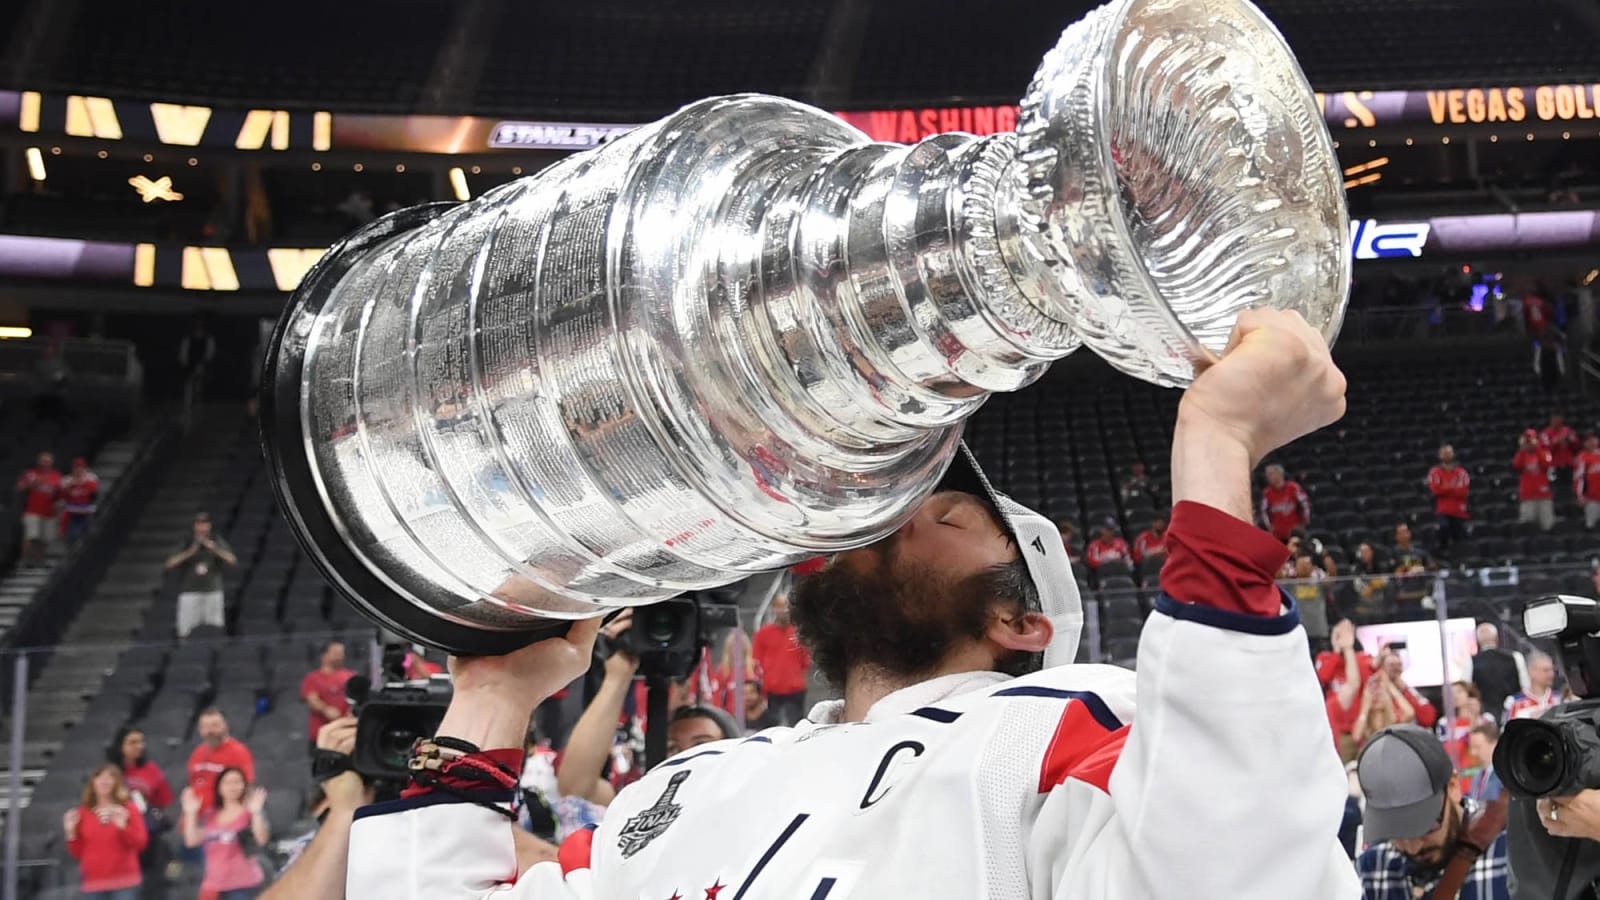 Capitals are now a Stanley Cup contender thanks to Ilya Kovalchuk